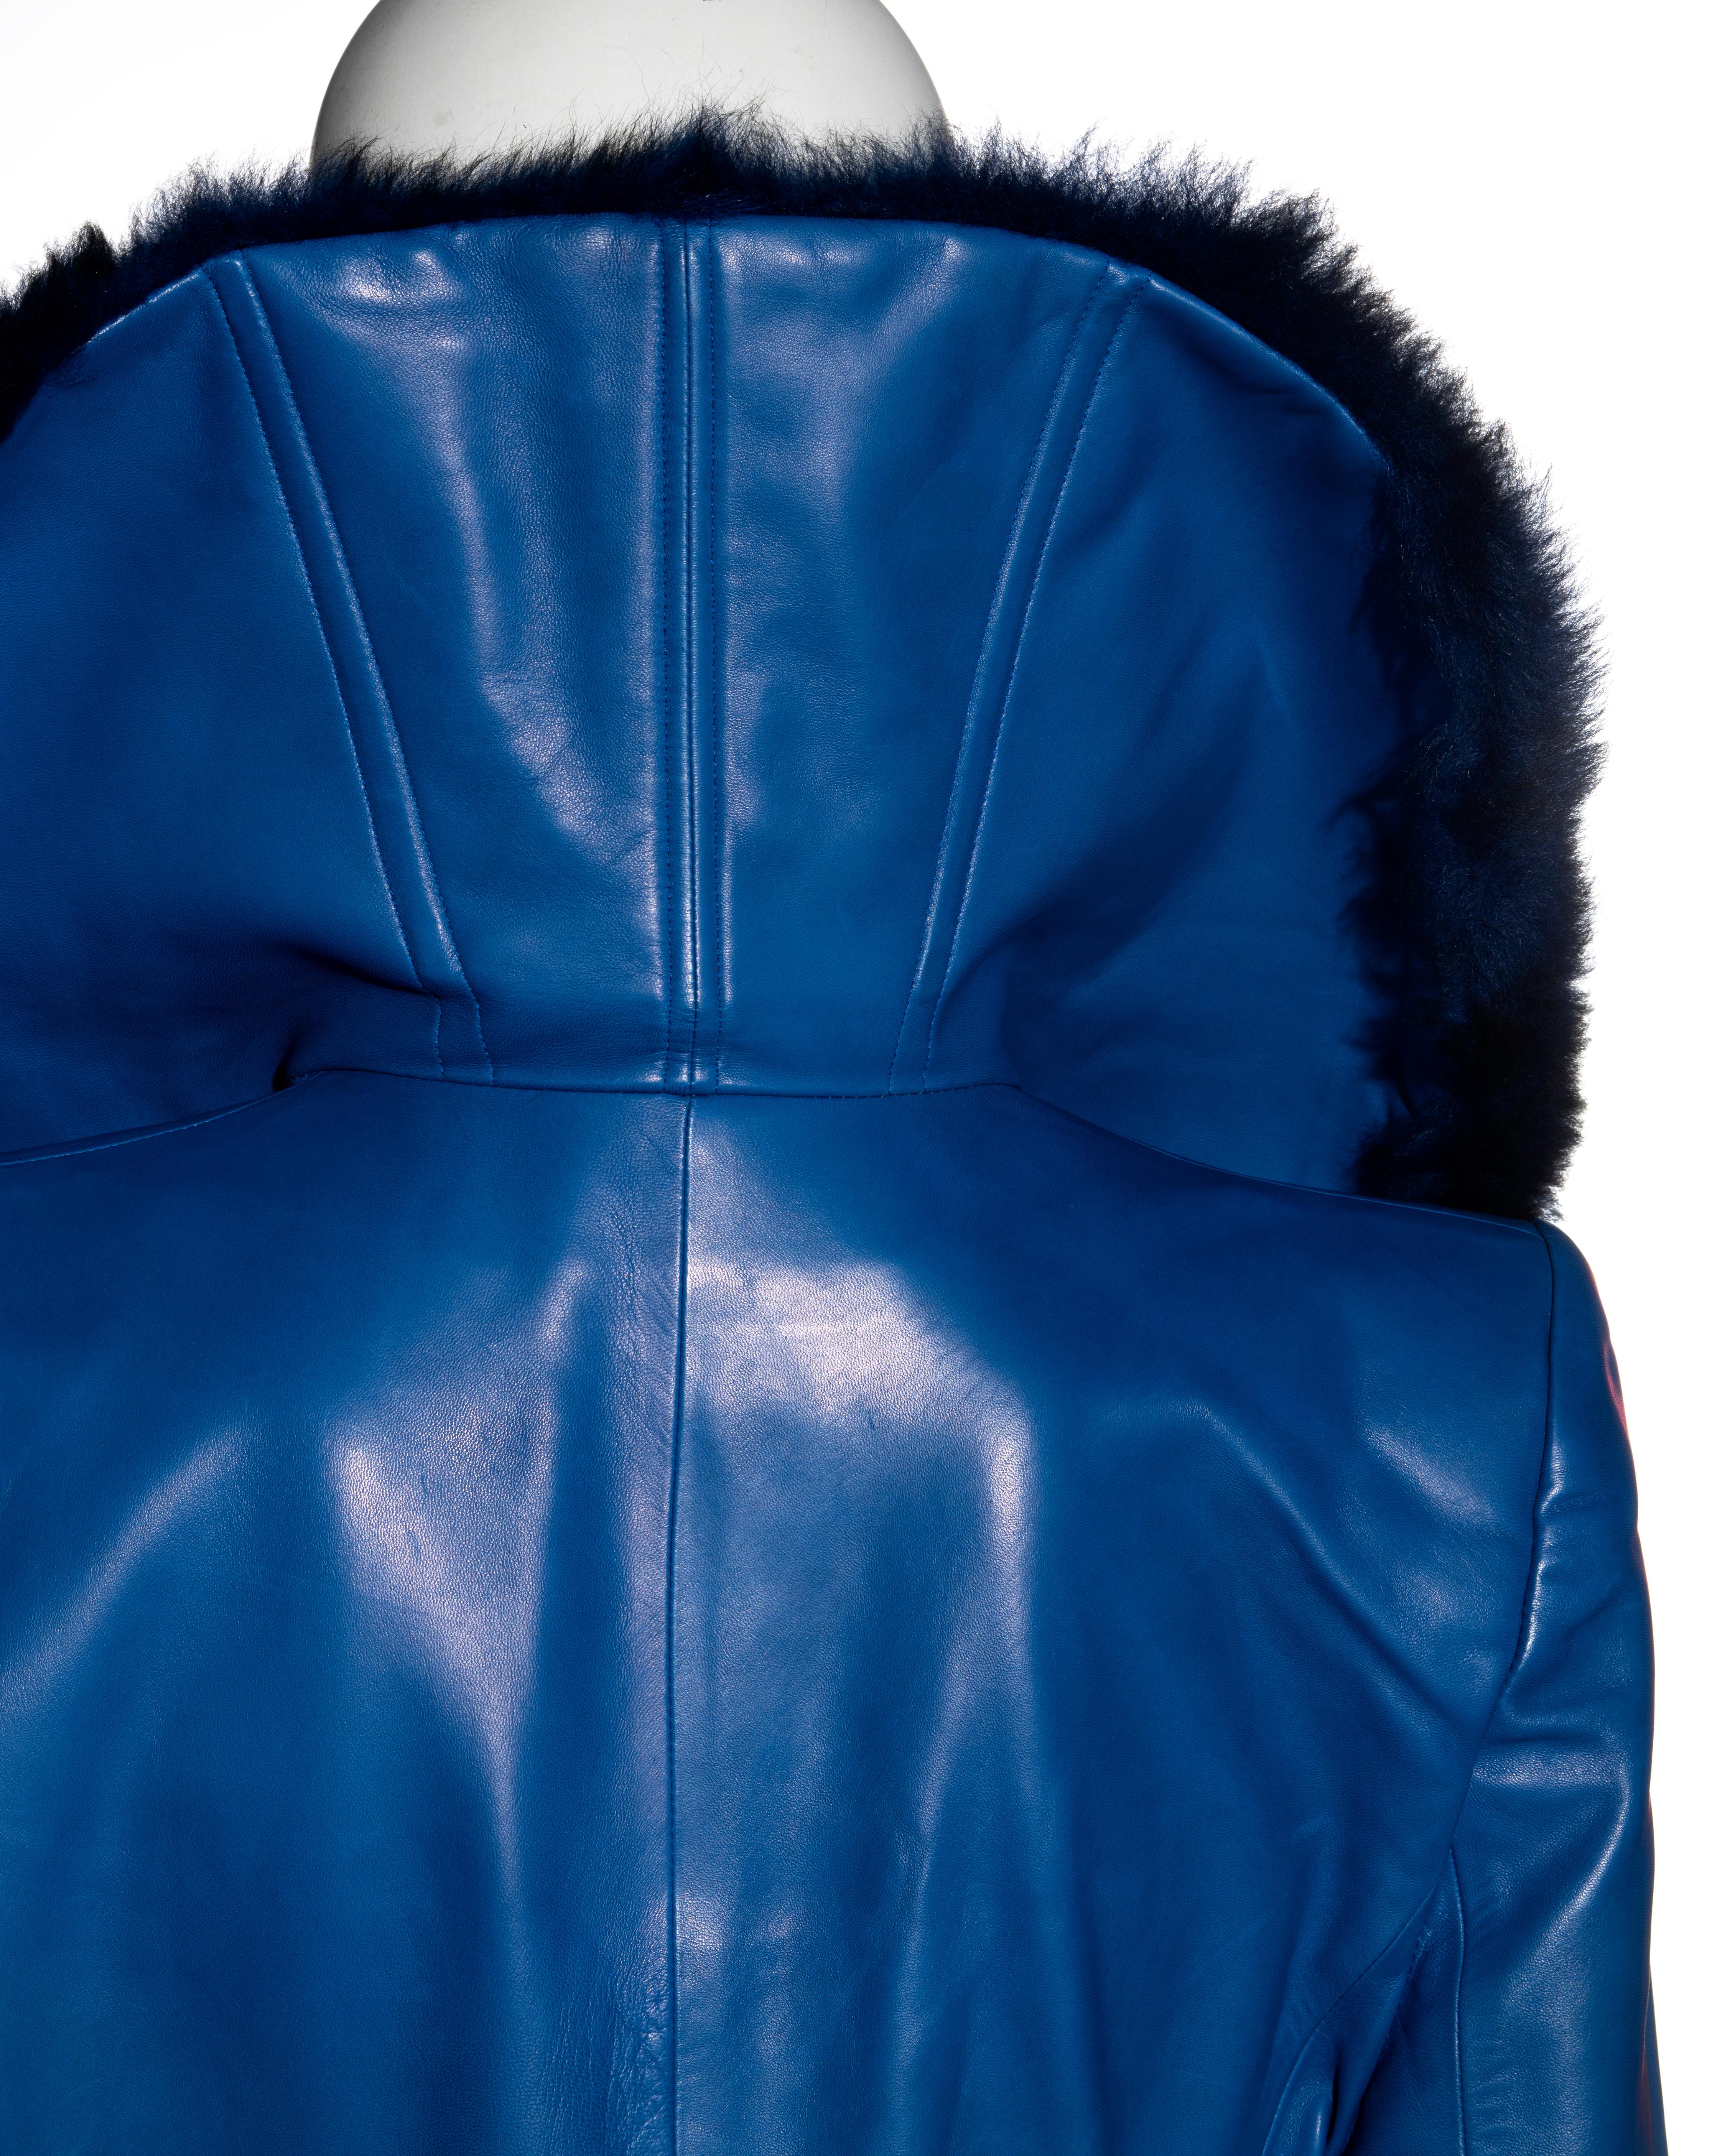 Givenchy by Alexander McQueen blue leather coat with faux fur collar, fw 1998 1